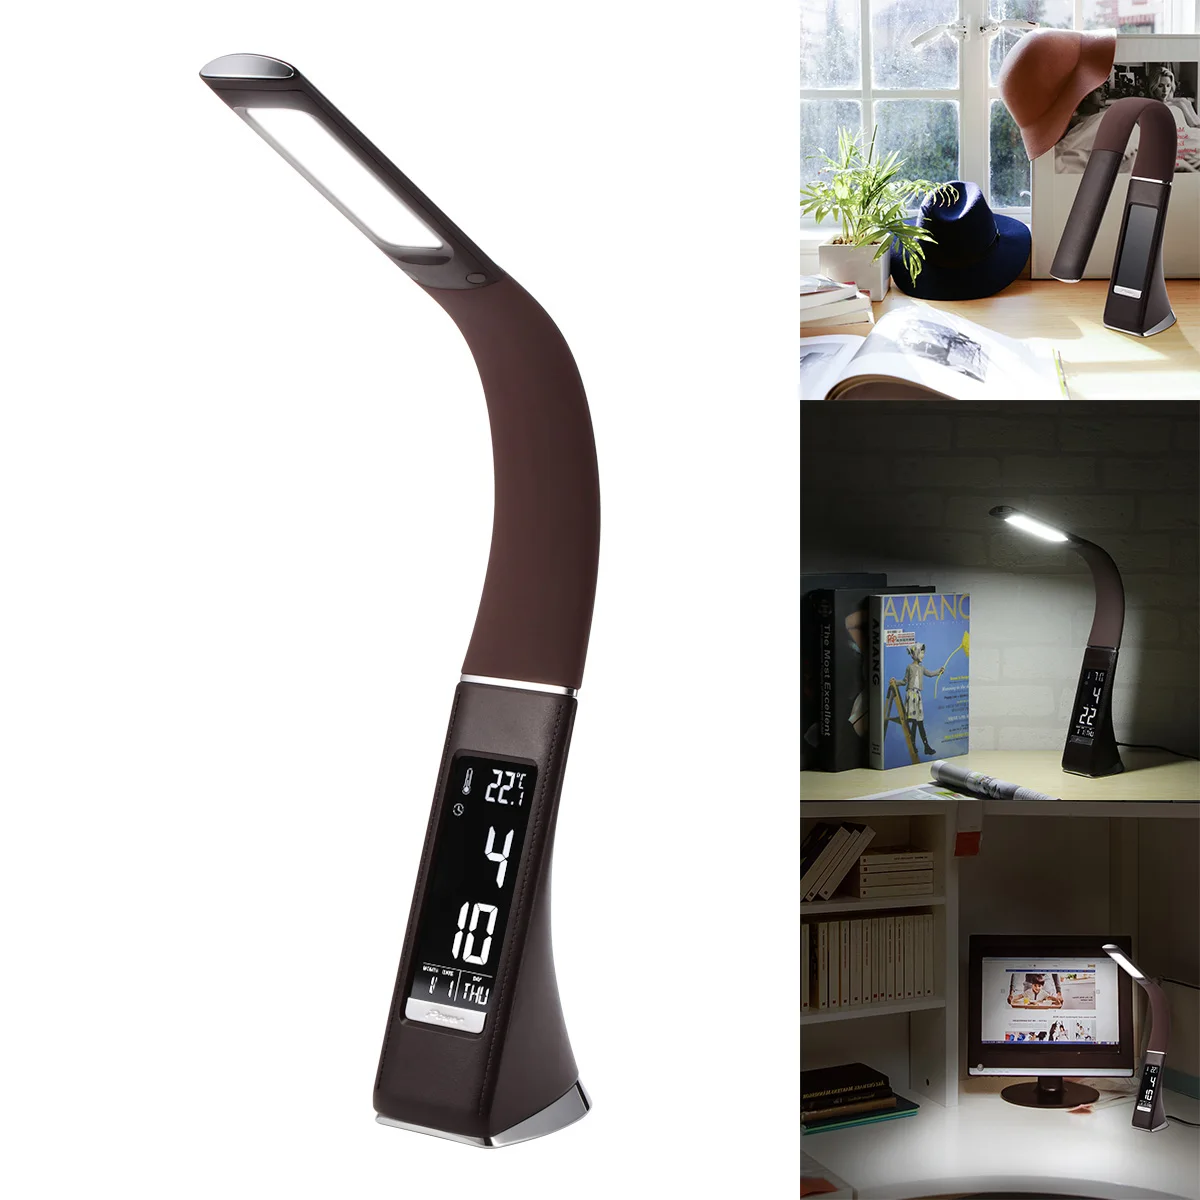 

5W Desk Lamp LED Touch Table Lamp Dimmable Desk Lighting Alarm Clock Calendar Time Temperature Display 3 Levels Brightness Home